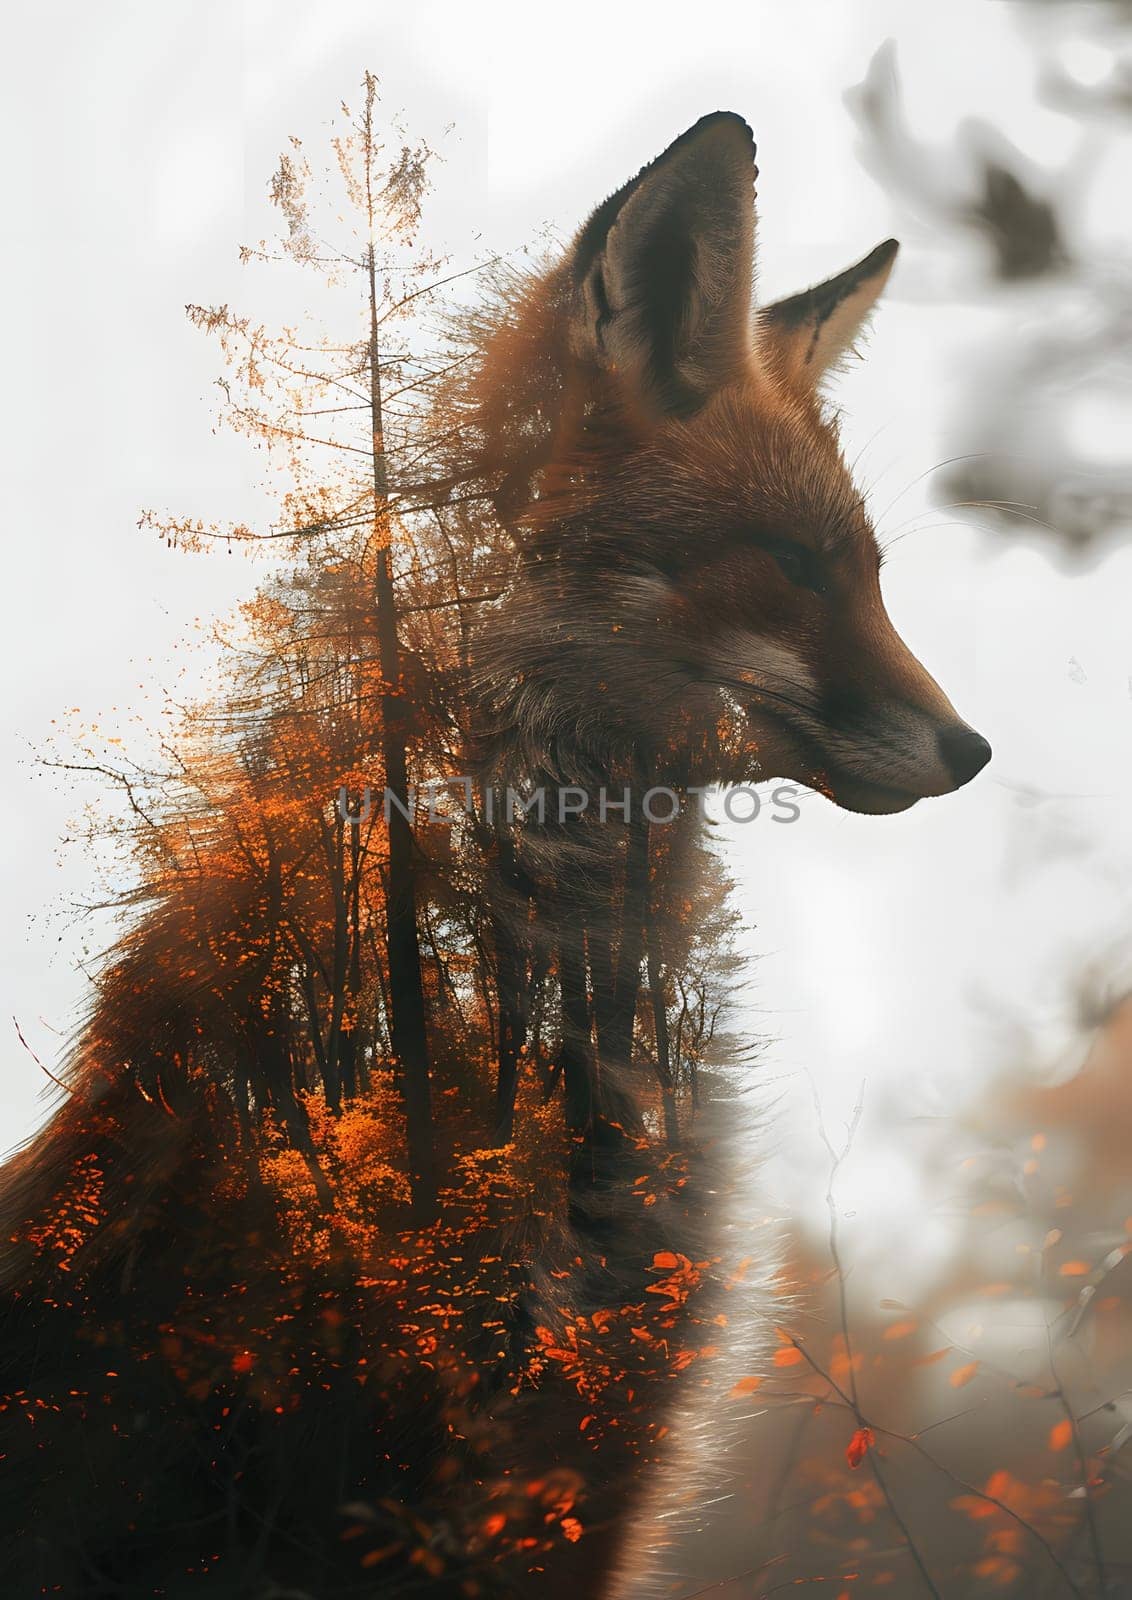 A carnivorous terrestrial animal, the fox, is portrayed in a double exposure with a natural landscape. Its snout resembles that of a dog breed, creating a mesmerizing painting